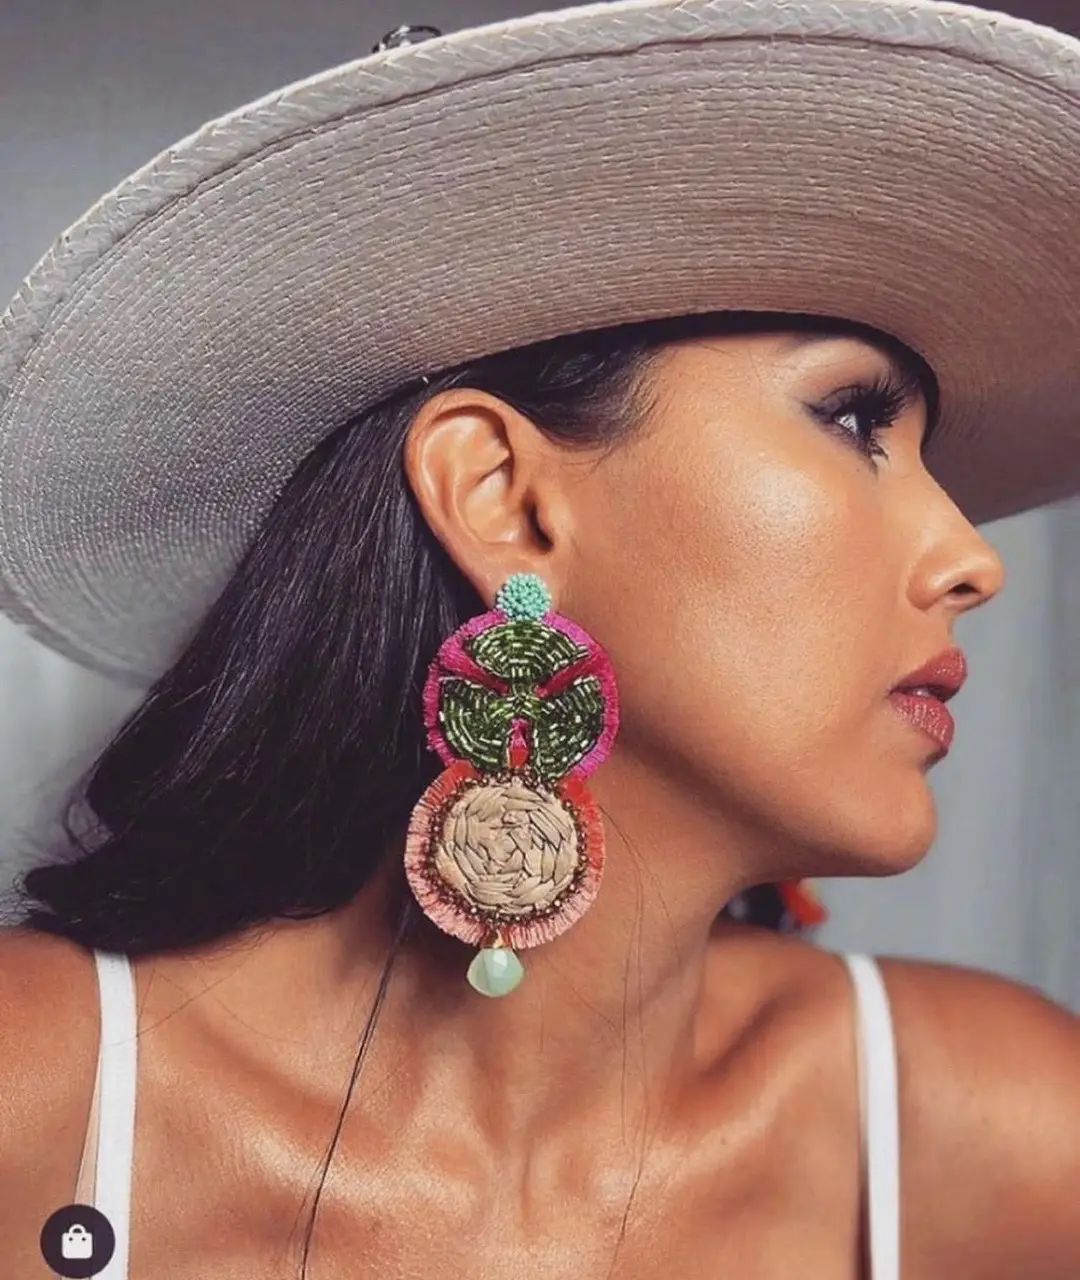 🇲🇽 México SIEMPRE está de Moda: SHOP our 100% HANDMADE Mexican Statement Earrings & Unisex Hat 🎩 SALE (13 Styles Available)‼️ . At CoLores Decor Our team is constantly experimenting with textures & “WOW” styles for a UNIQUE statement design for any room…Introducing TOP 🇲🇽 MeXican Artisan Design & CATAPULTING our culture’s Talent through the vision of our founder, GiL Herrera  . You think you know MeXican Artisan Design, but you have NO IDEA how PASSIONATE , CREATIVE, MASTERFUL, & HARD-WORKING MY PEOPLE ARE.  I, GiL Herrera, founder of CoLores Decor will be my mission to catapult MeXican Design & Designers to the TOP. It NEEDS to be seen & Enjoyed. Your Support is Appreciated! . . . #coloresdecor #interiordesign #mexicandesign #mexicanhomedecor #mexicanchic  #interiordesigninspiration #homedecor #interiordesign #hat #vogueliving #elledecor #voguemexico #fedora #interiordesigner #mexicanrestaurant #artesaniamexicana #hechoenmexico  #mexico #interiorismomexico #designer #mexicanwedding #bodamexicana #aretesartesanales #handmadeearrings #statementearrings 